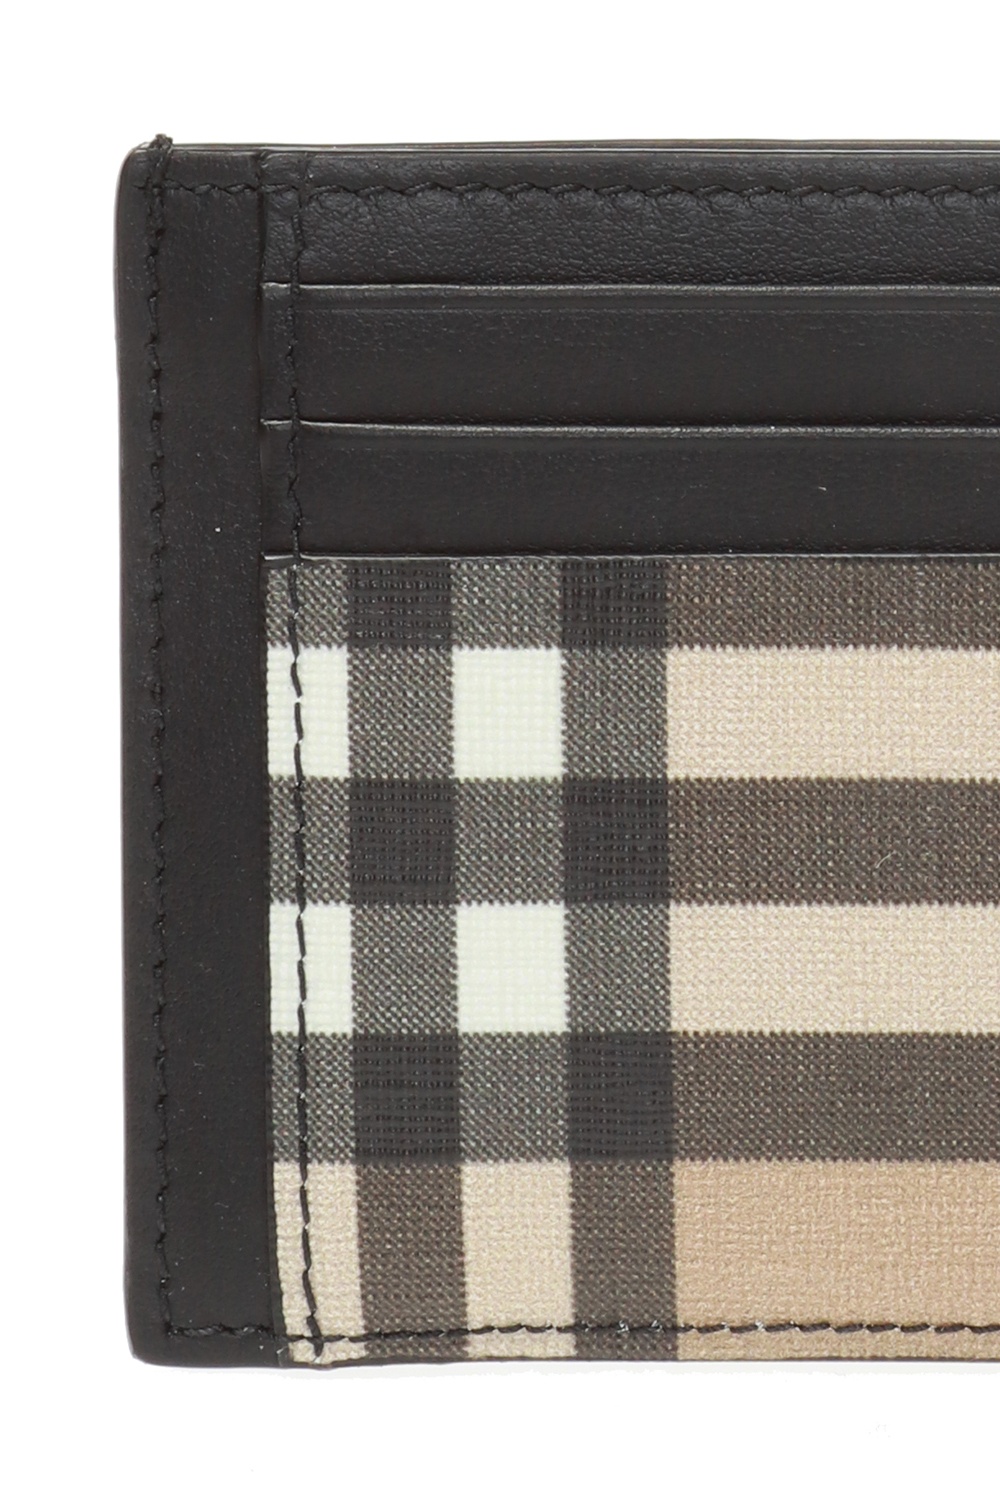 Men's Vintage Check Card Holder by Burberry